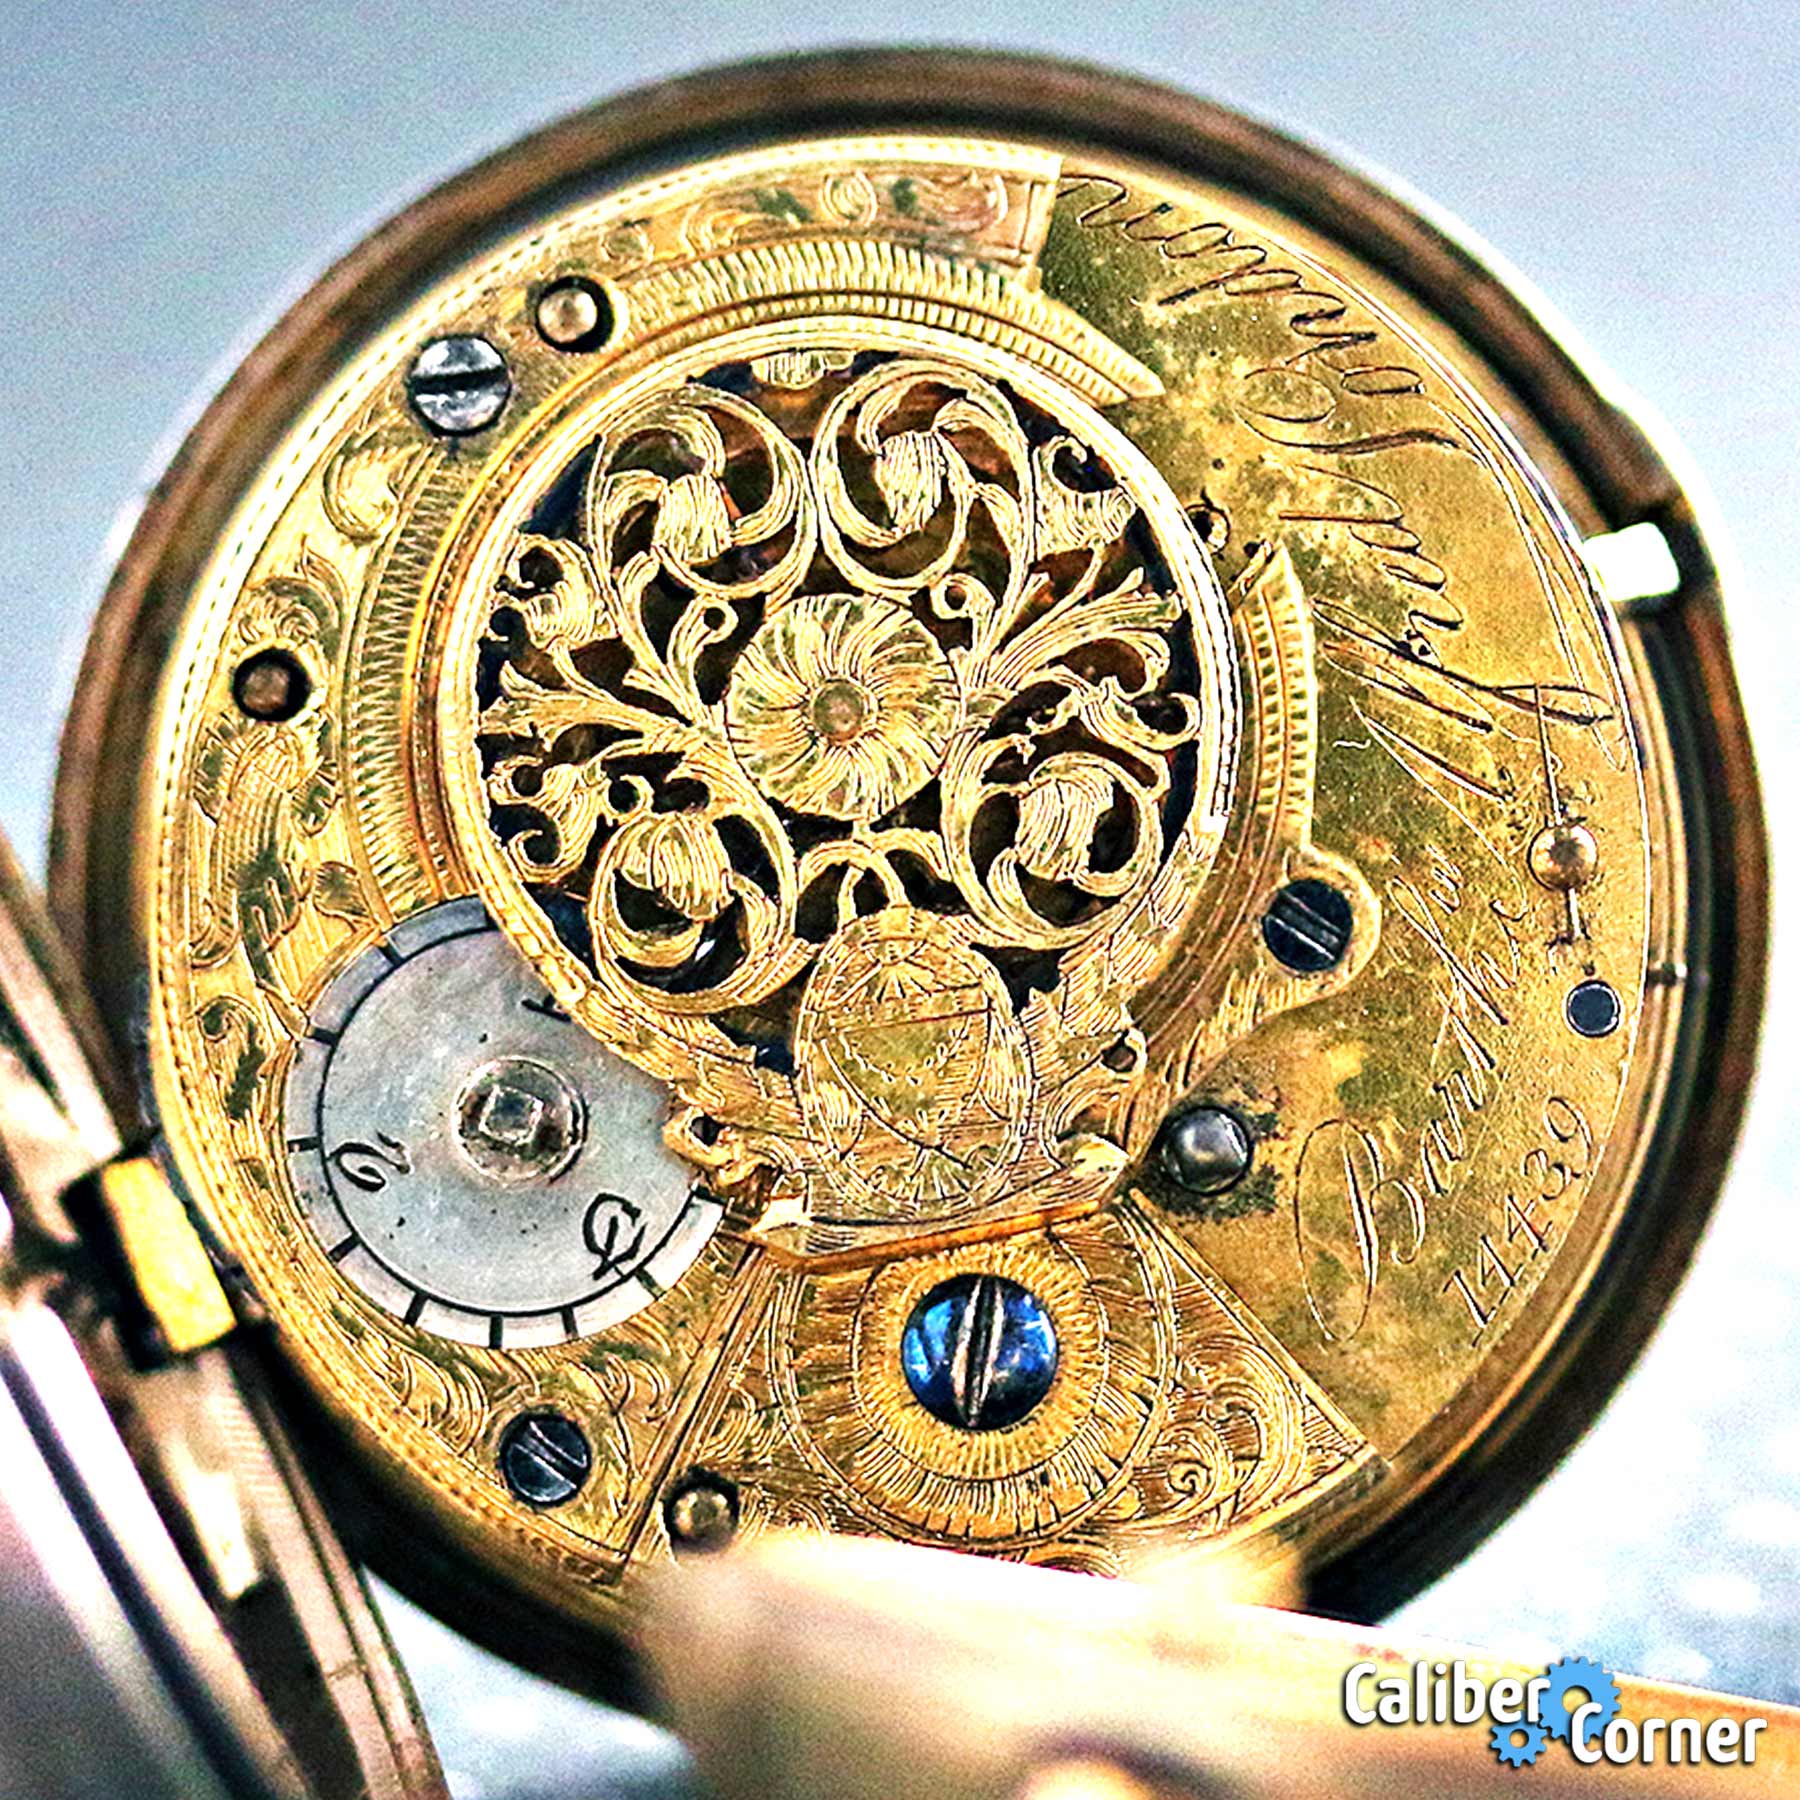 Verge Fusee English Pocket Watch Example